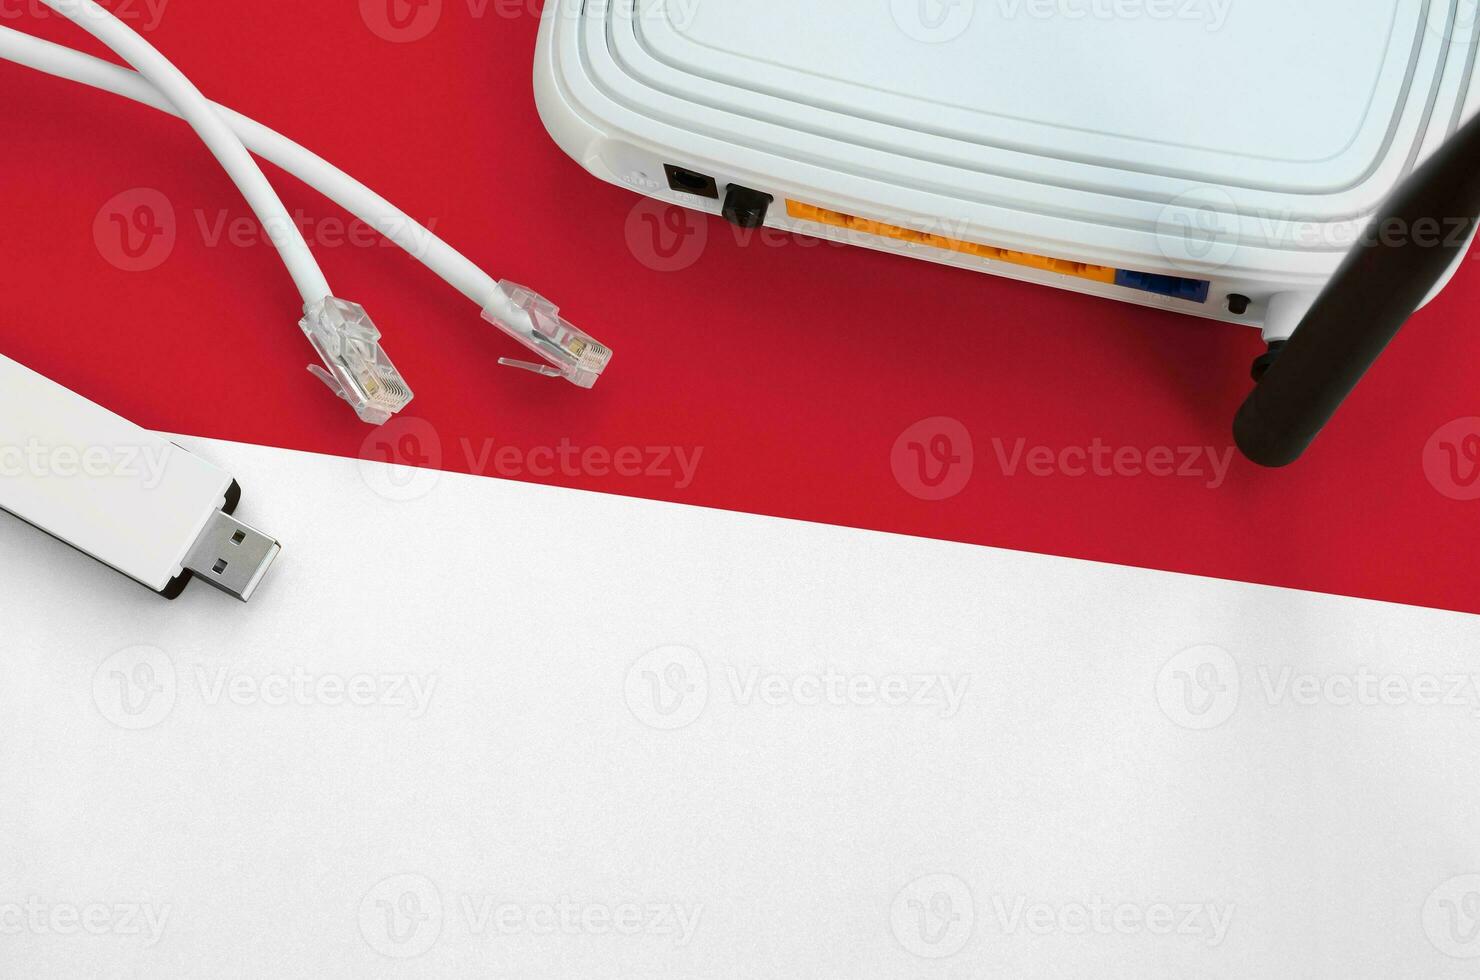 Monaco flag depicted on table with internet rj45 cable, wireless usb wifi adapter and router. Internet connection concept photo